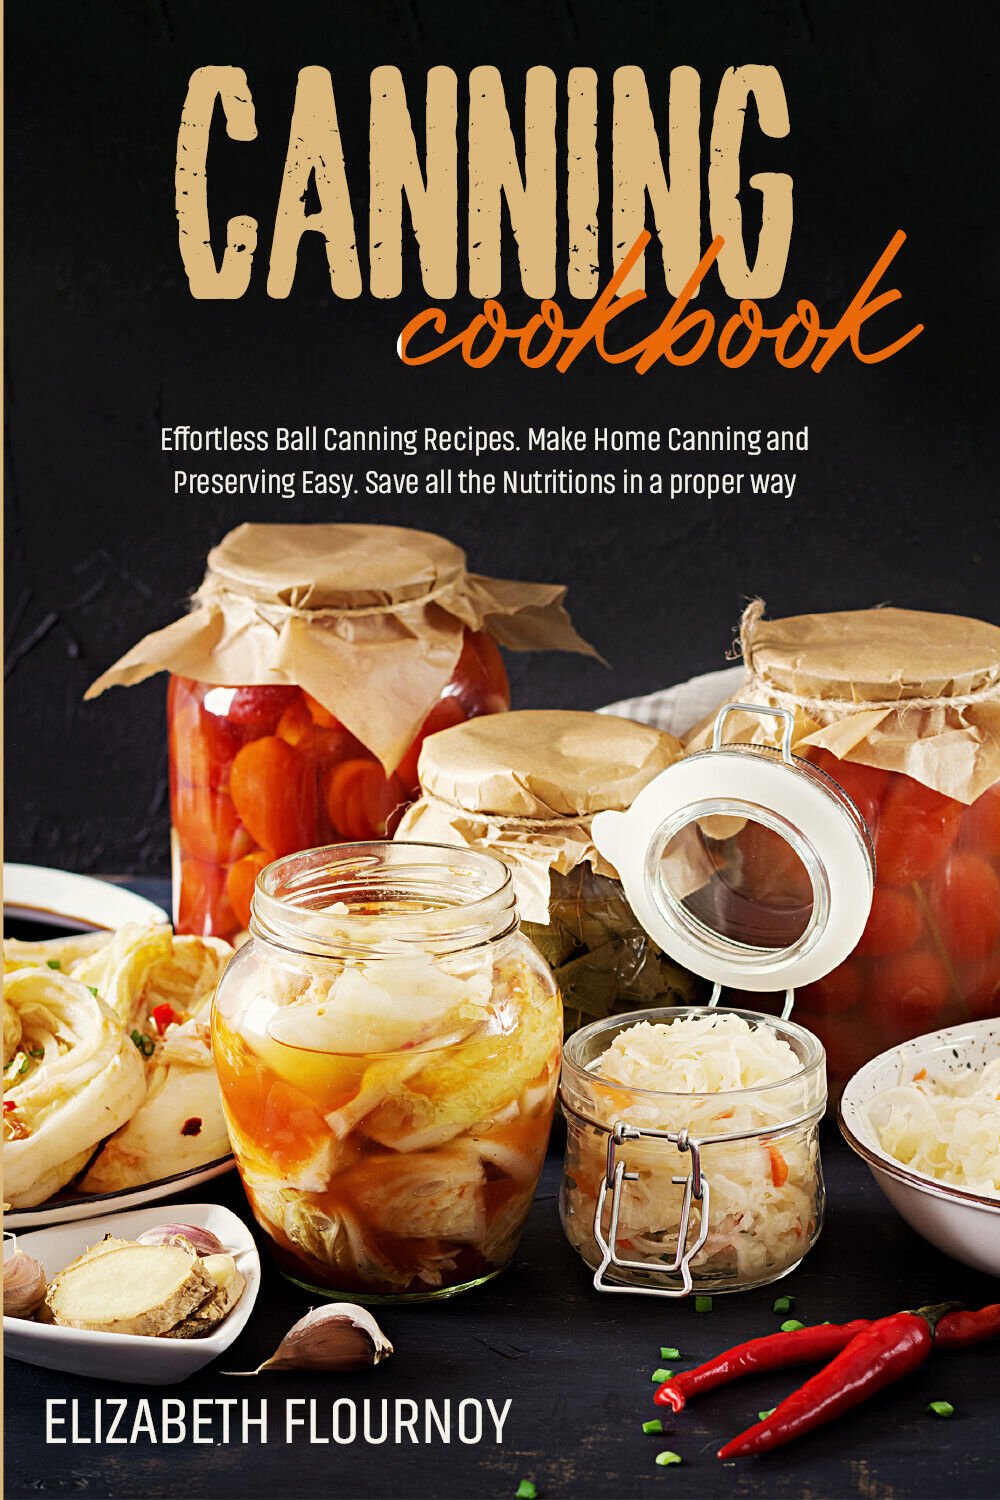 Canning cookbook. Effortless Ball Canning Recipes. Make Home Canning and Preserv libro usato